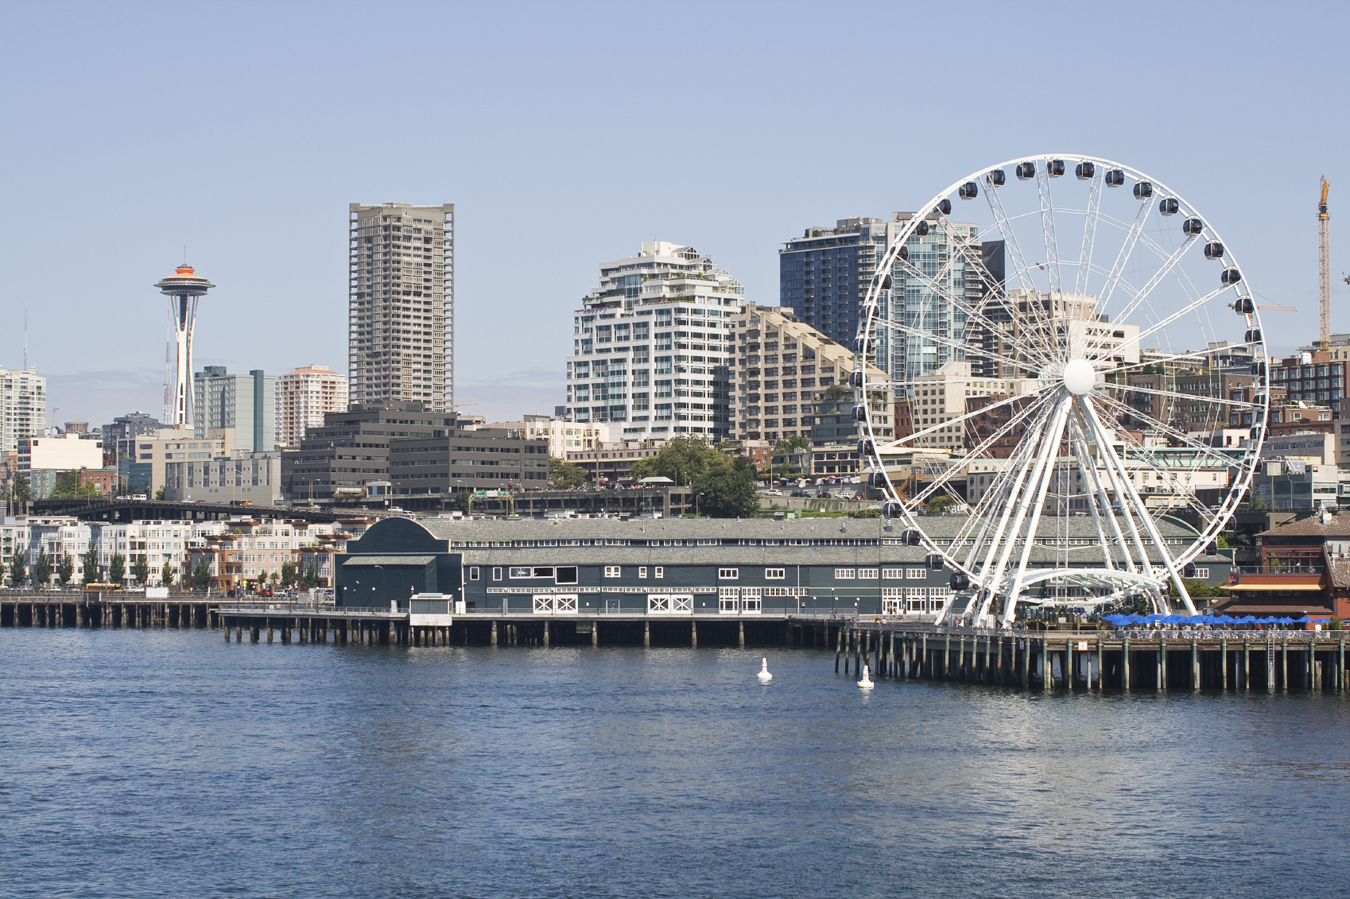 Geotechnical construction contractor Hayward Baker Inc. has been awarded a $41 million contract involving the repair and replacement of a large section of the Elliott Bay seawall.